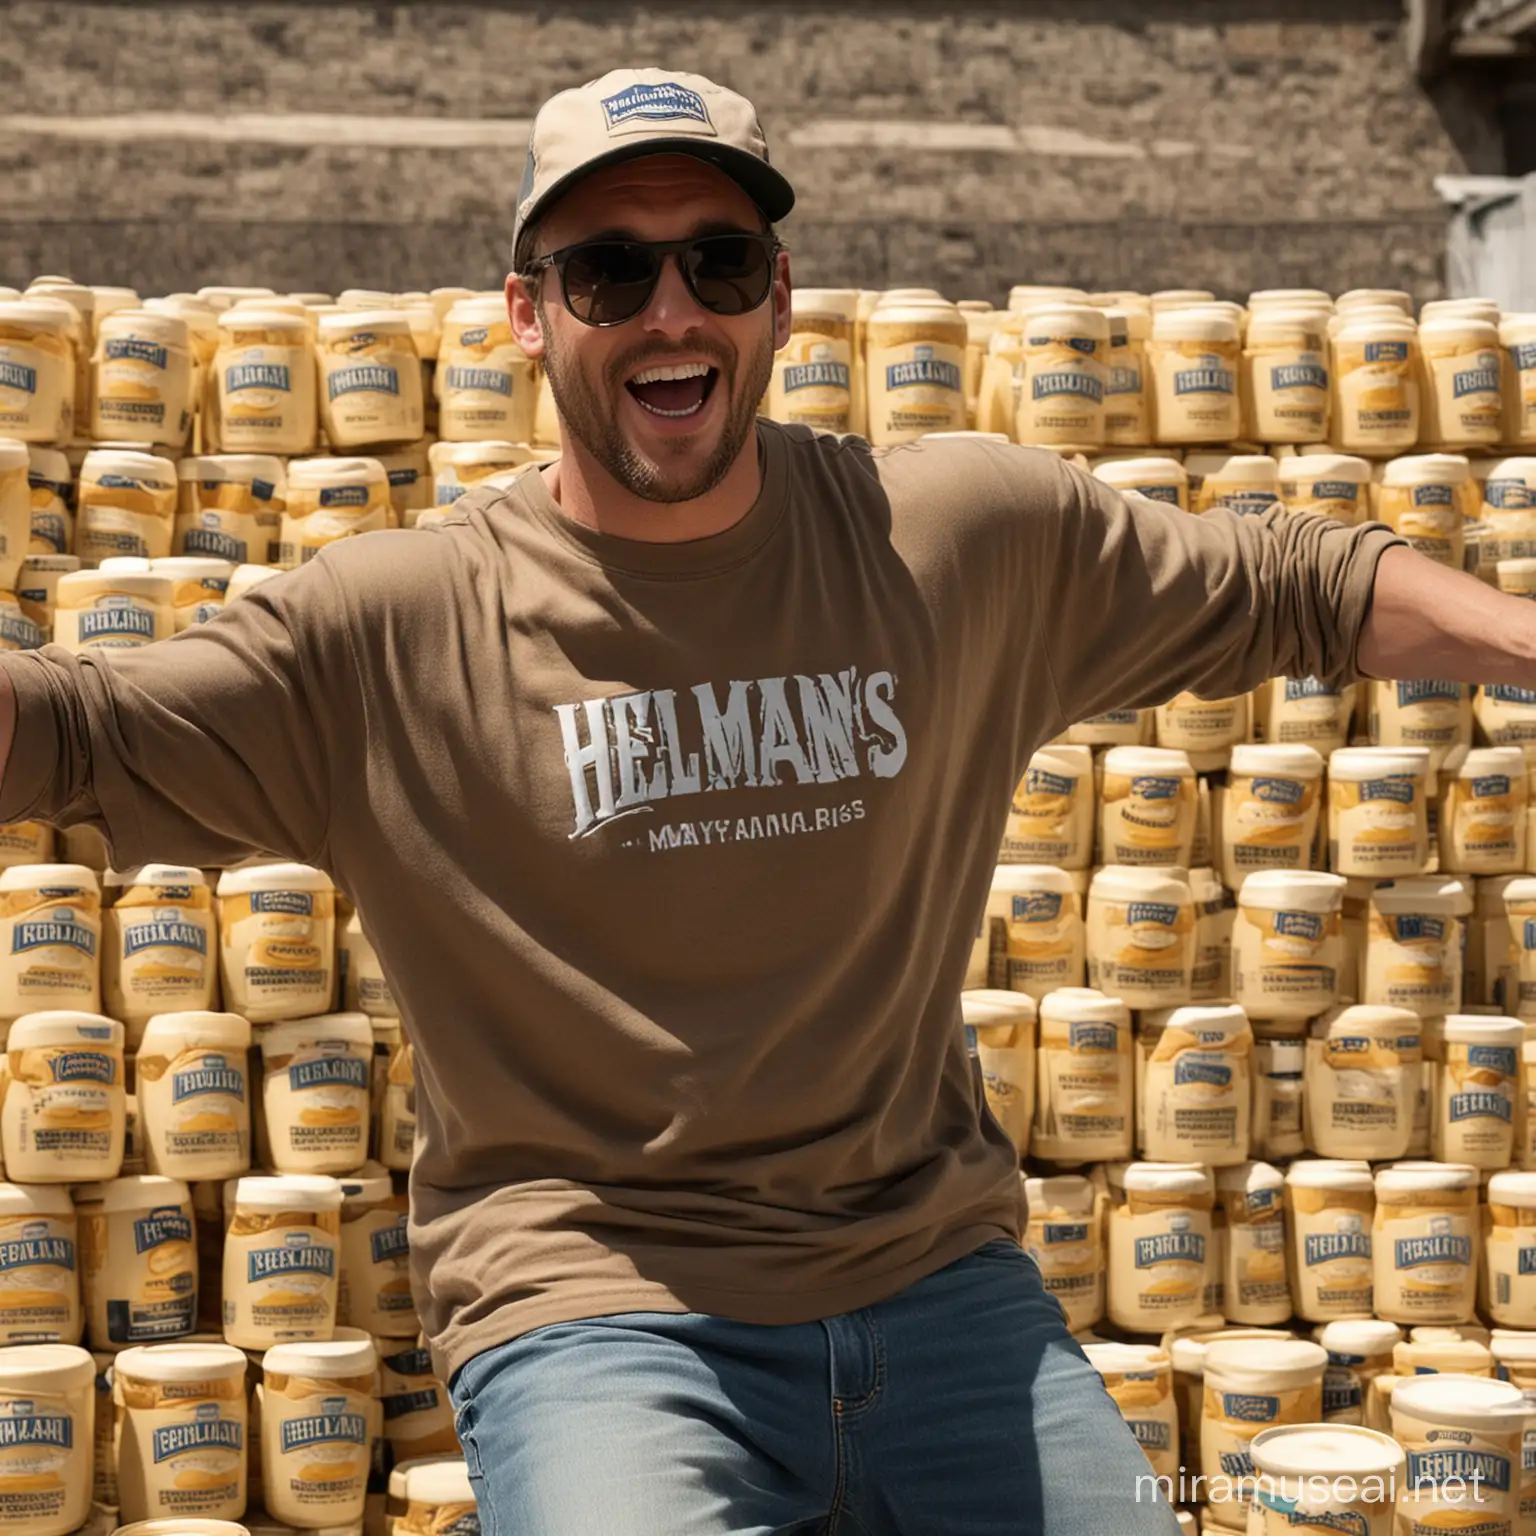 a man wearing a baseball cap backwards and sunglasses, he is dancing with giant jars of Hellman's Mayonnaise